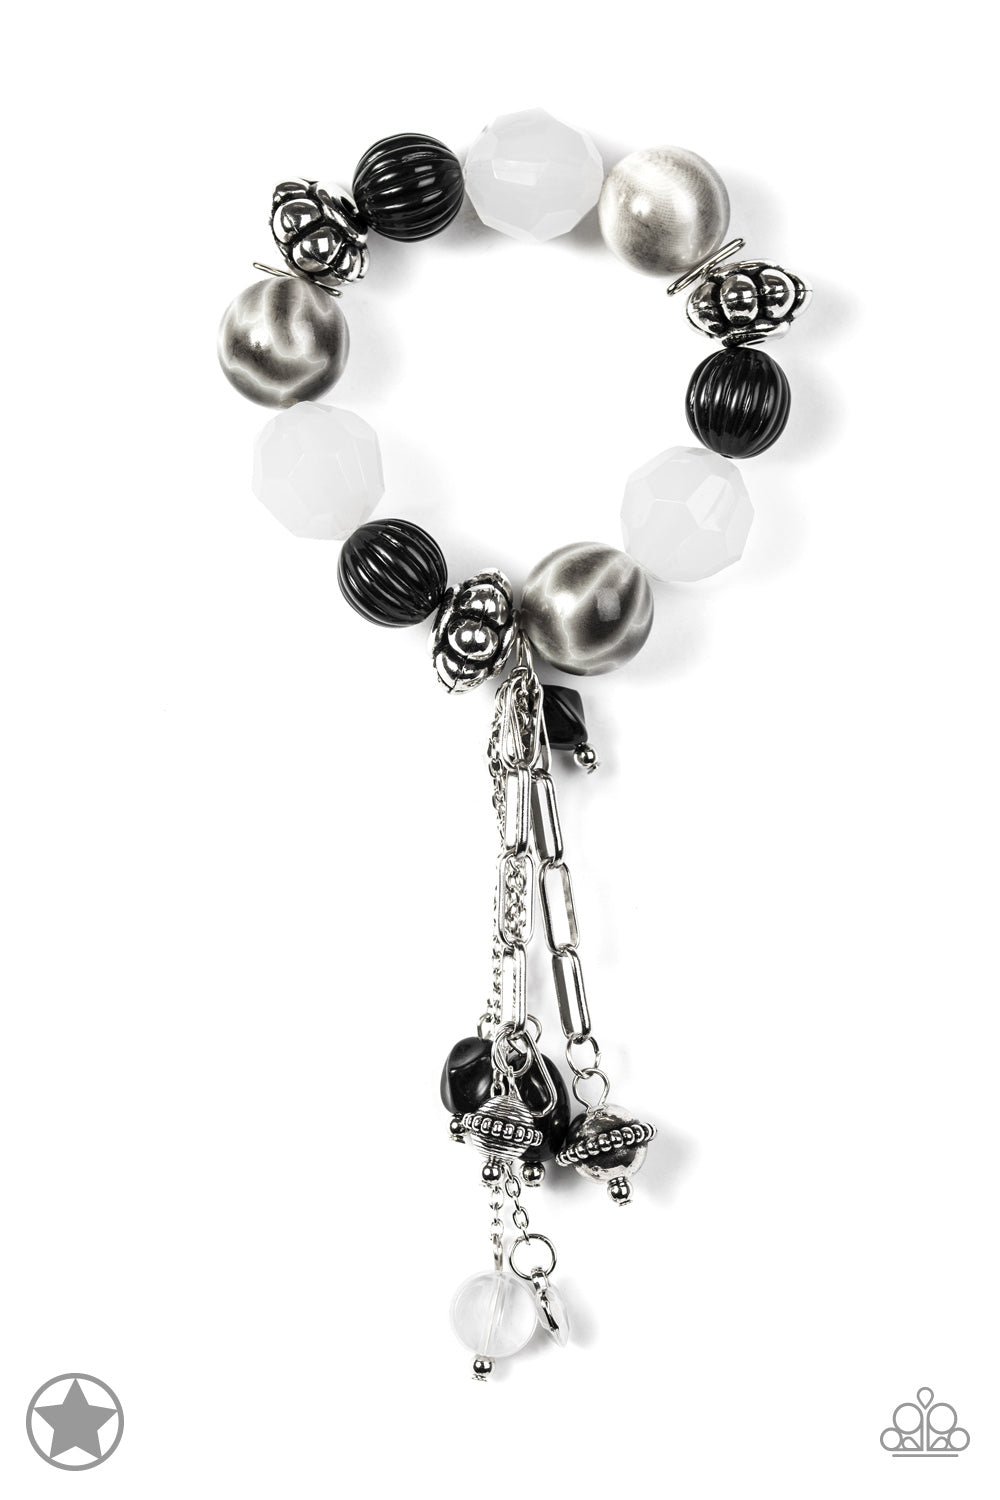 Dainty black beads nestled among beautiful silver and white pieces along a stretchy band. Dangling charms add a dramatic effect.